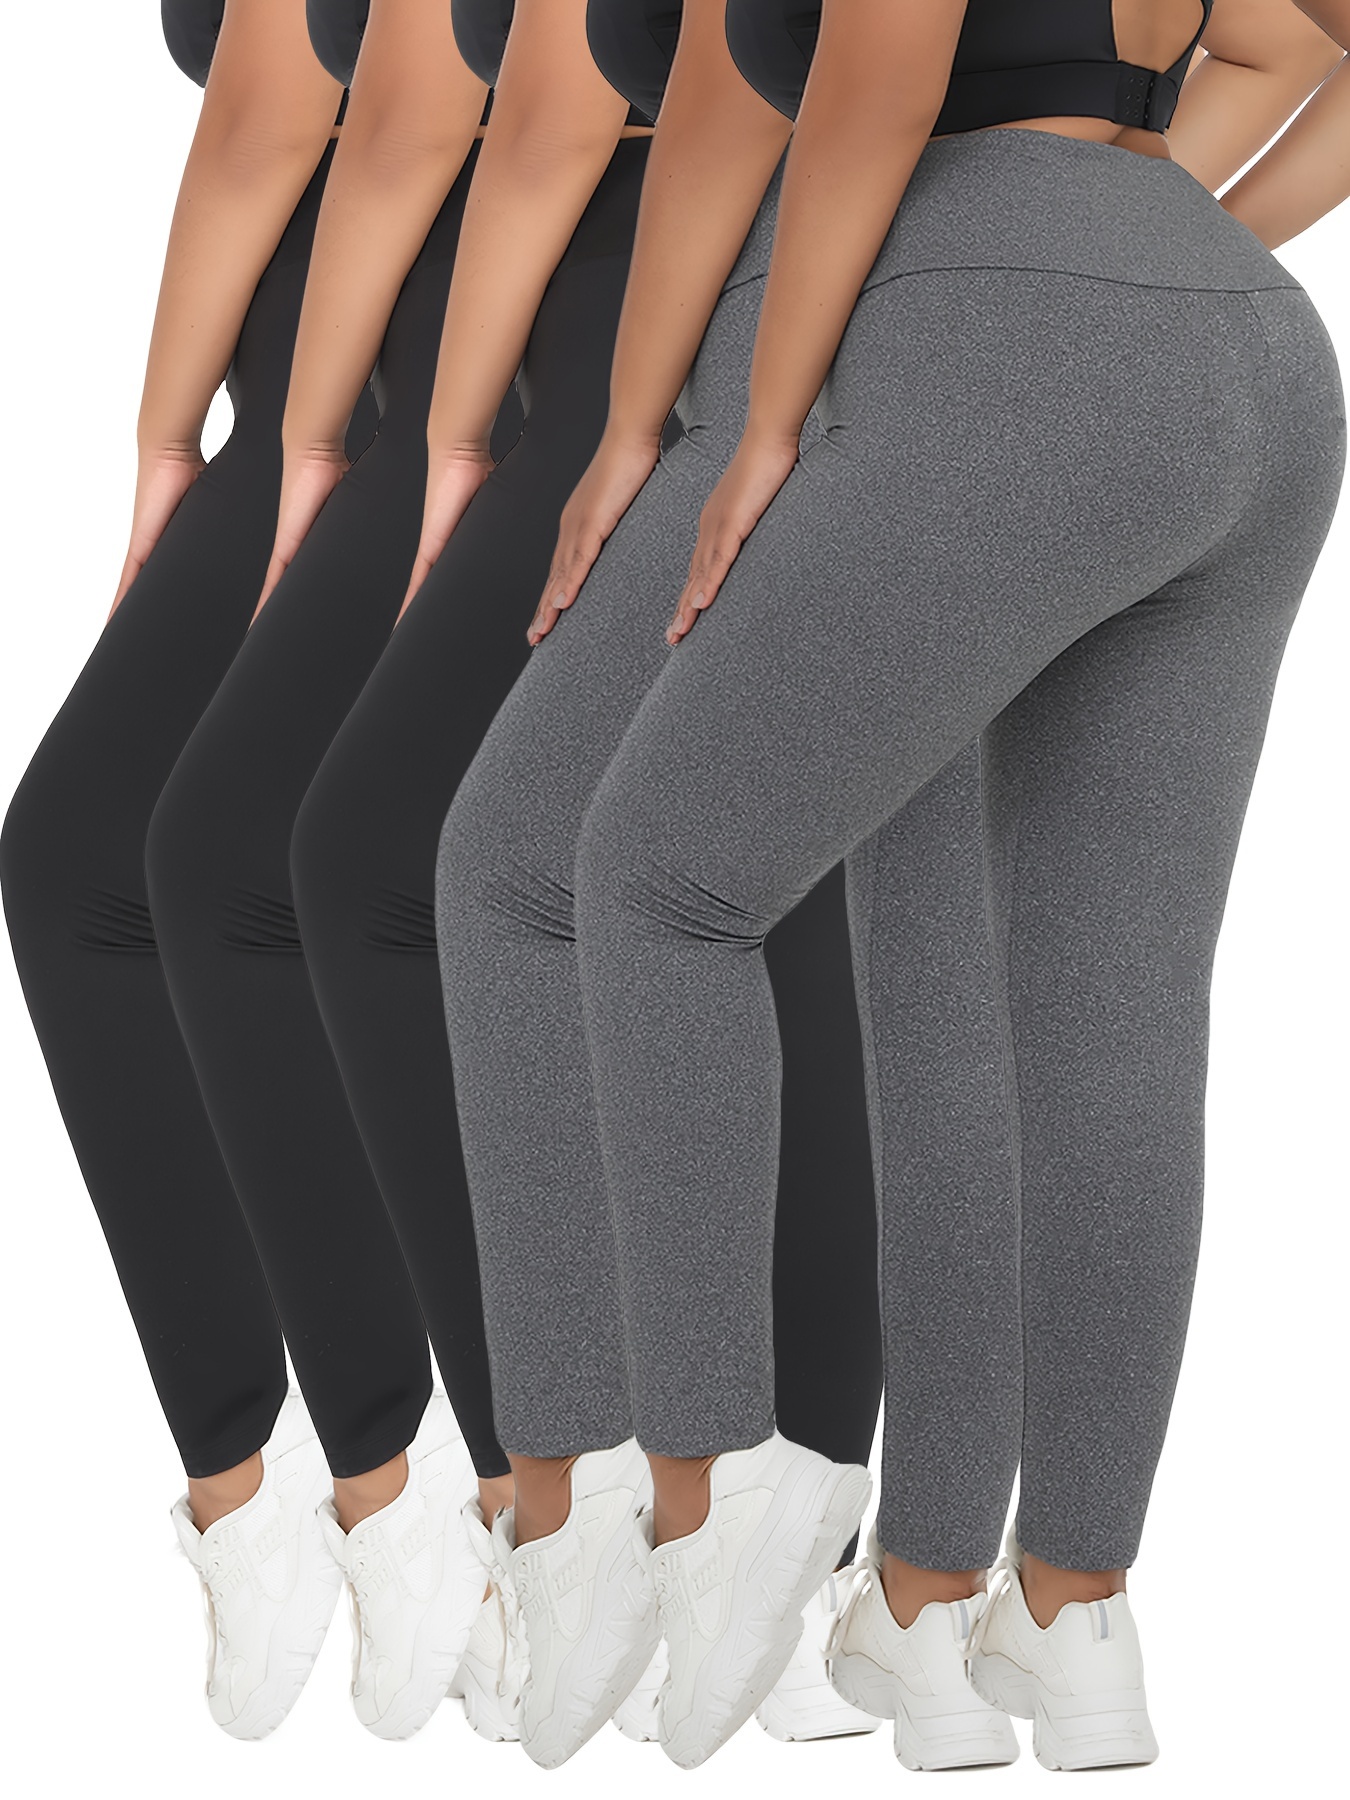 Workout Outfits for Women 5 Pieces Yoga Exercise Fitness Gym